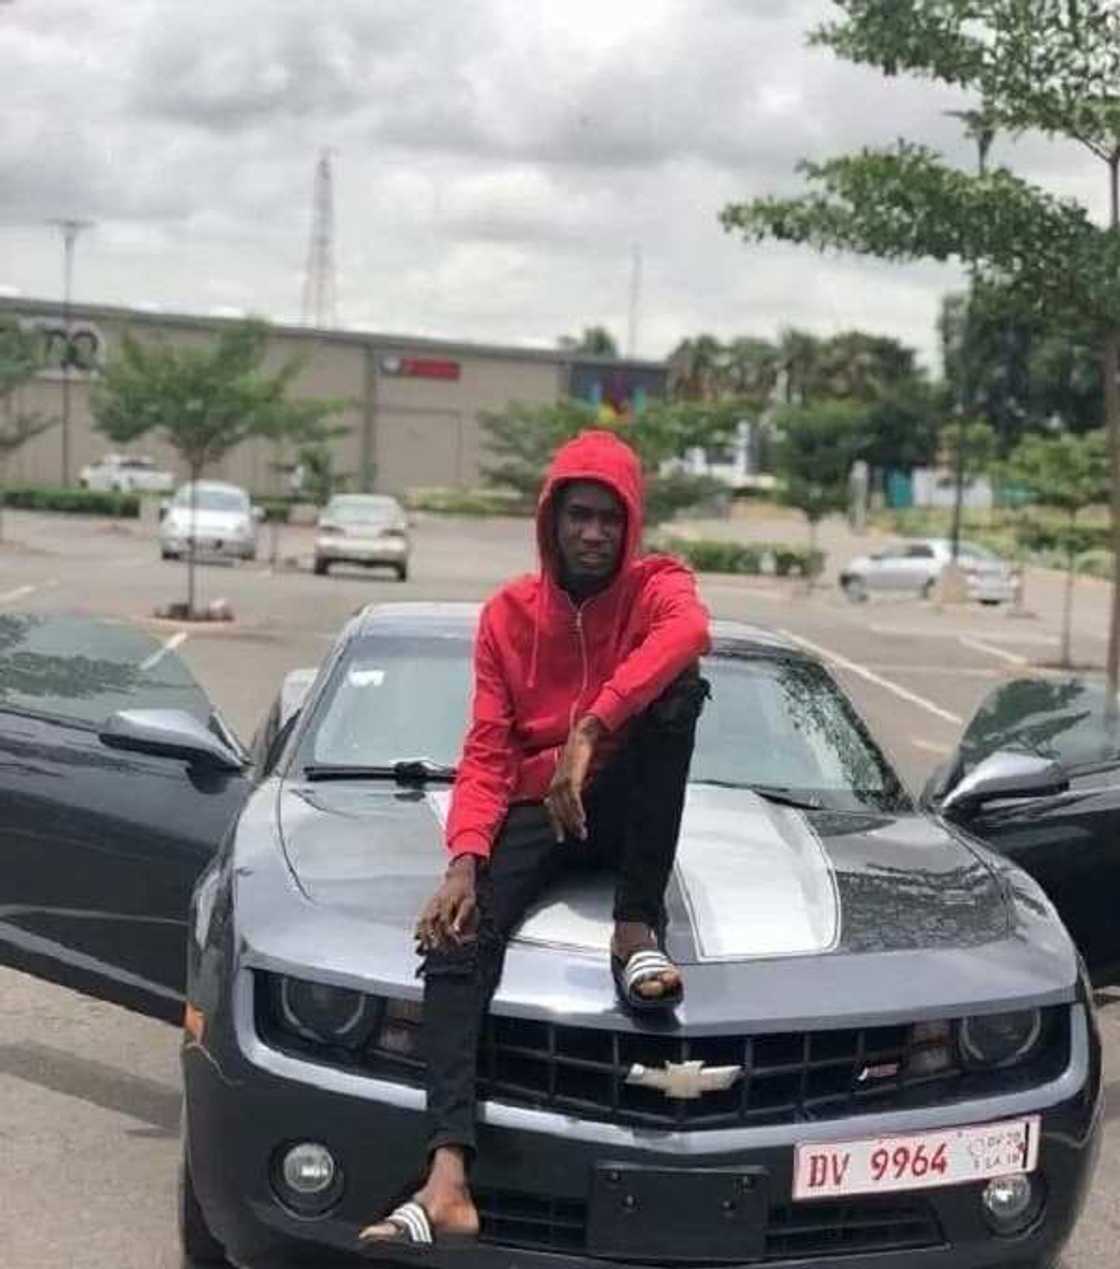 Ypee gets $30,000 Chevrolet Camaro as gift